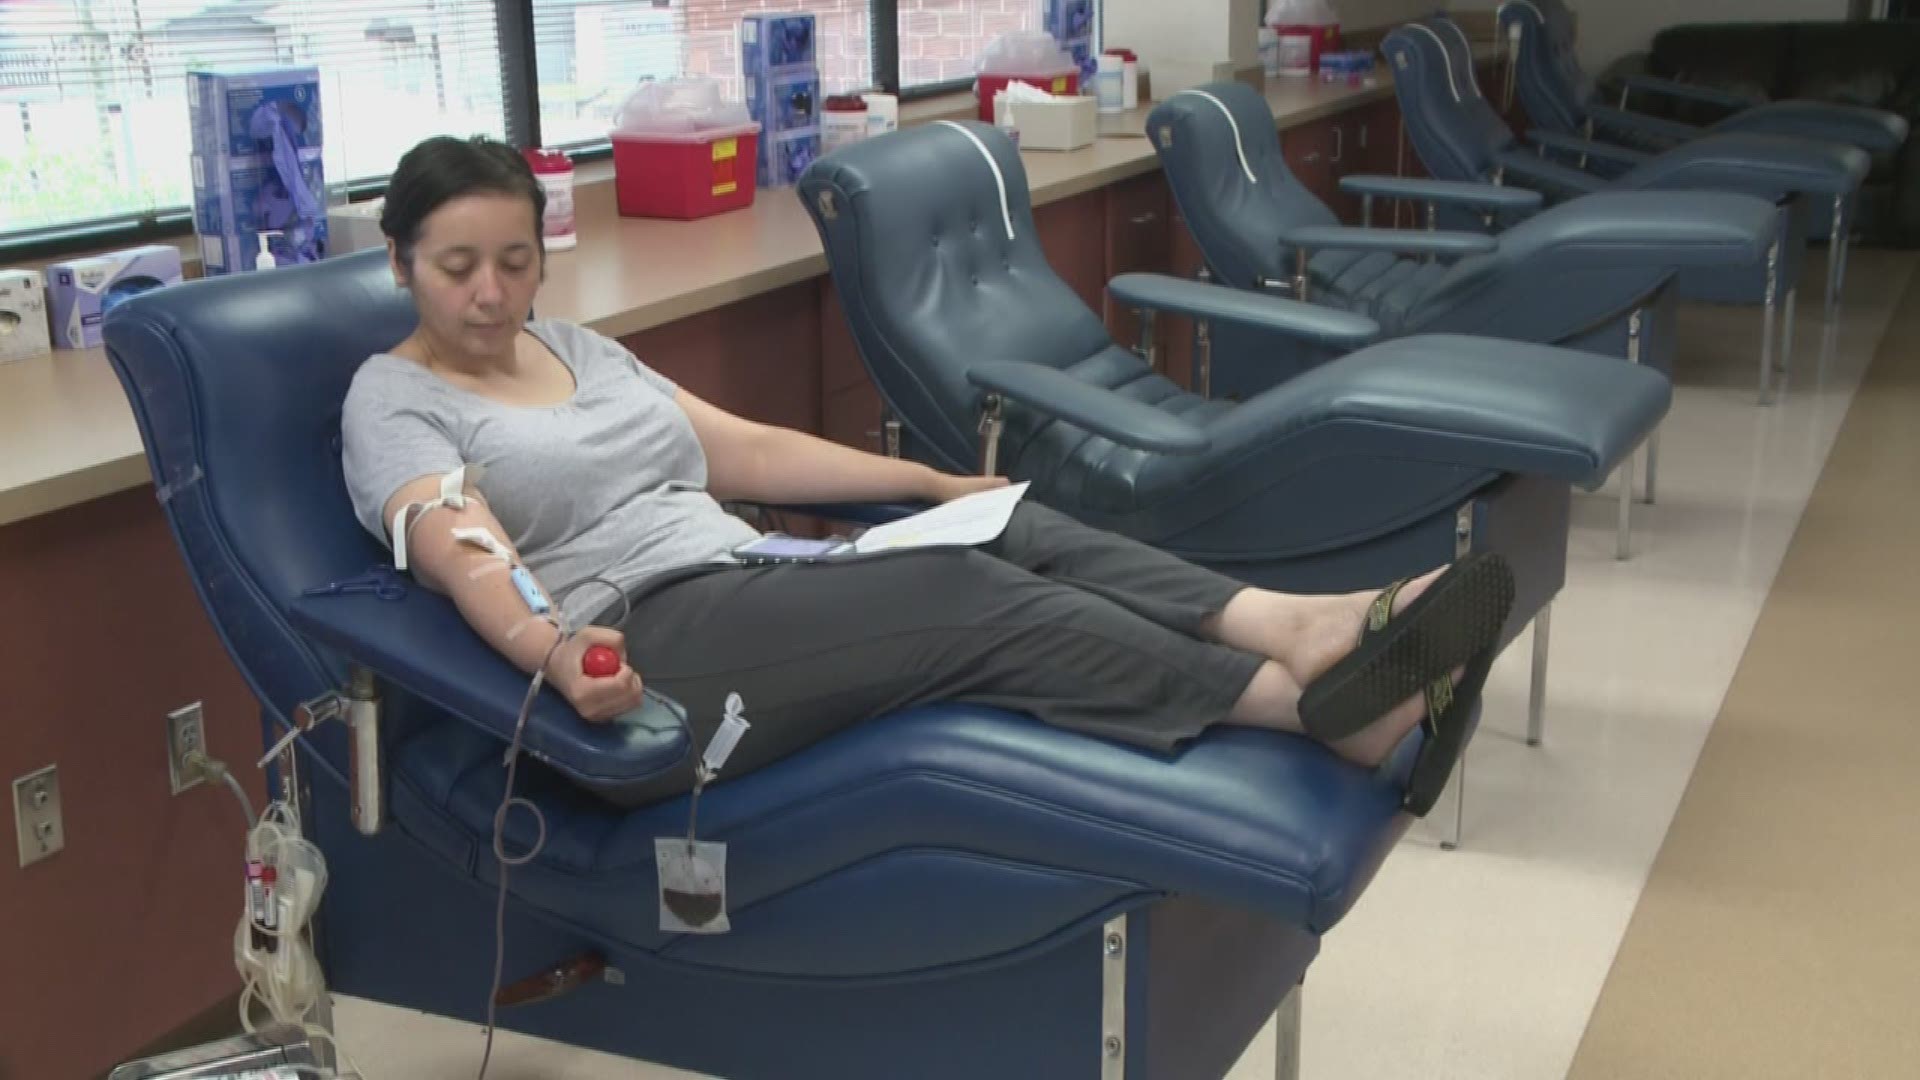 After a busy Fourth of July weekend, MEDIC Regional Blood Center is low on donations. Right now, the center is in need of O negative and O positive donors.